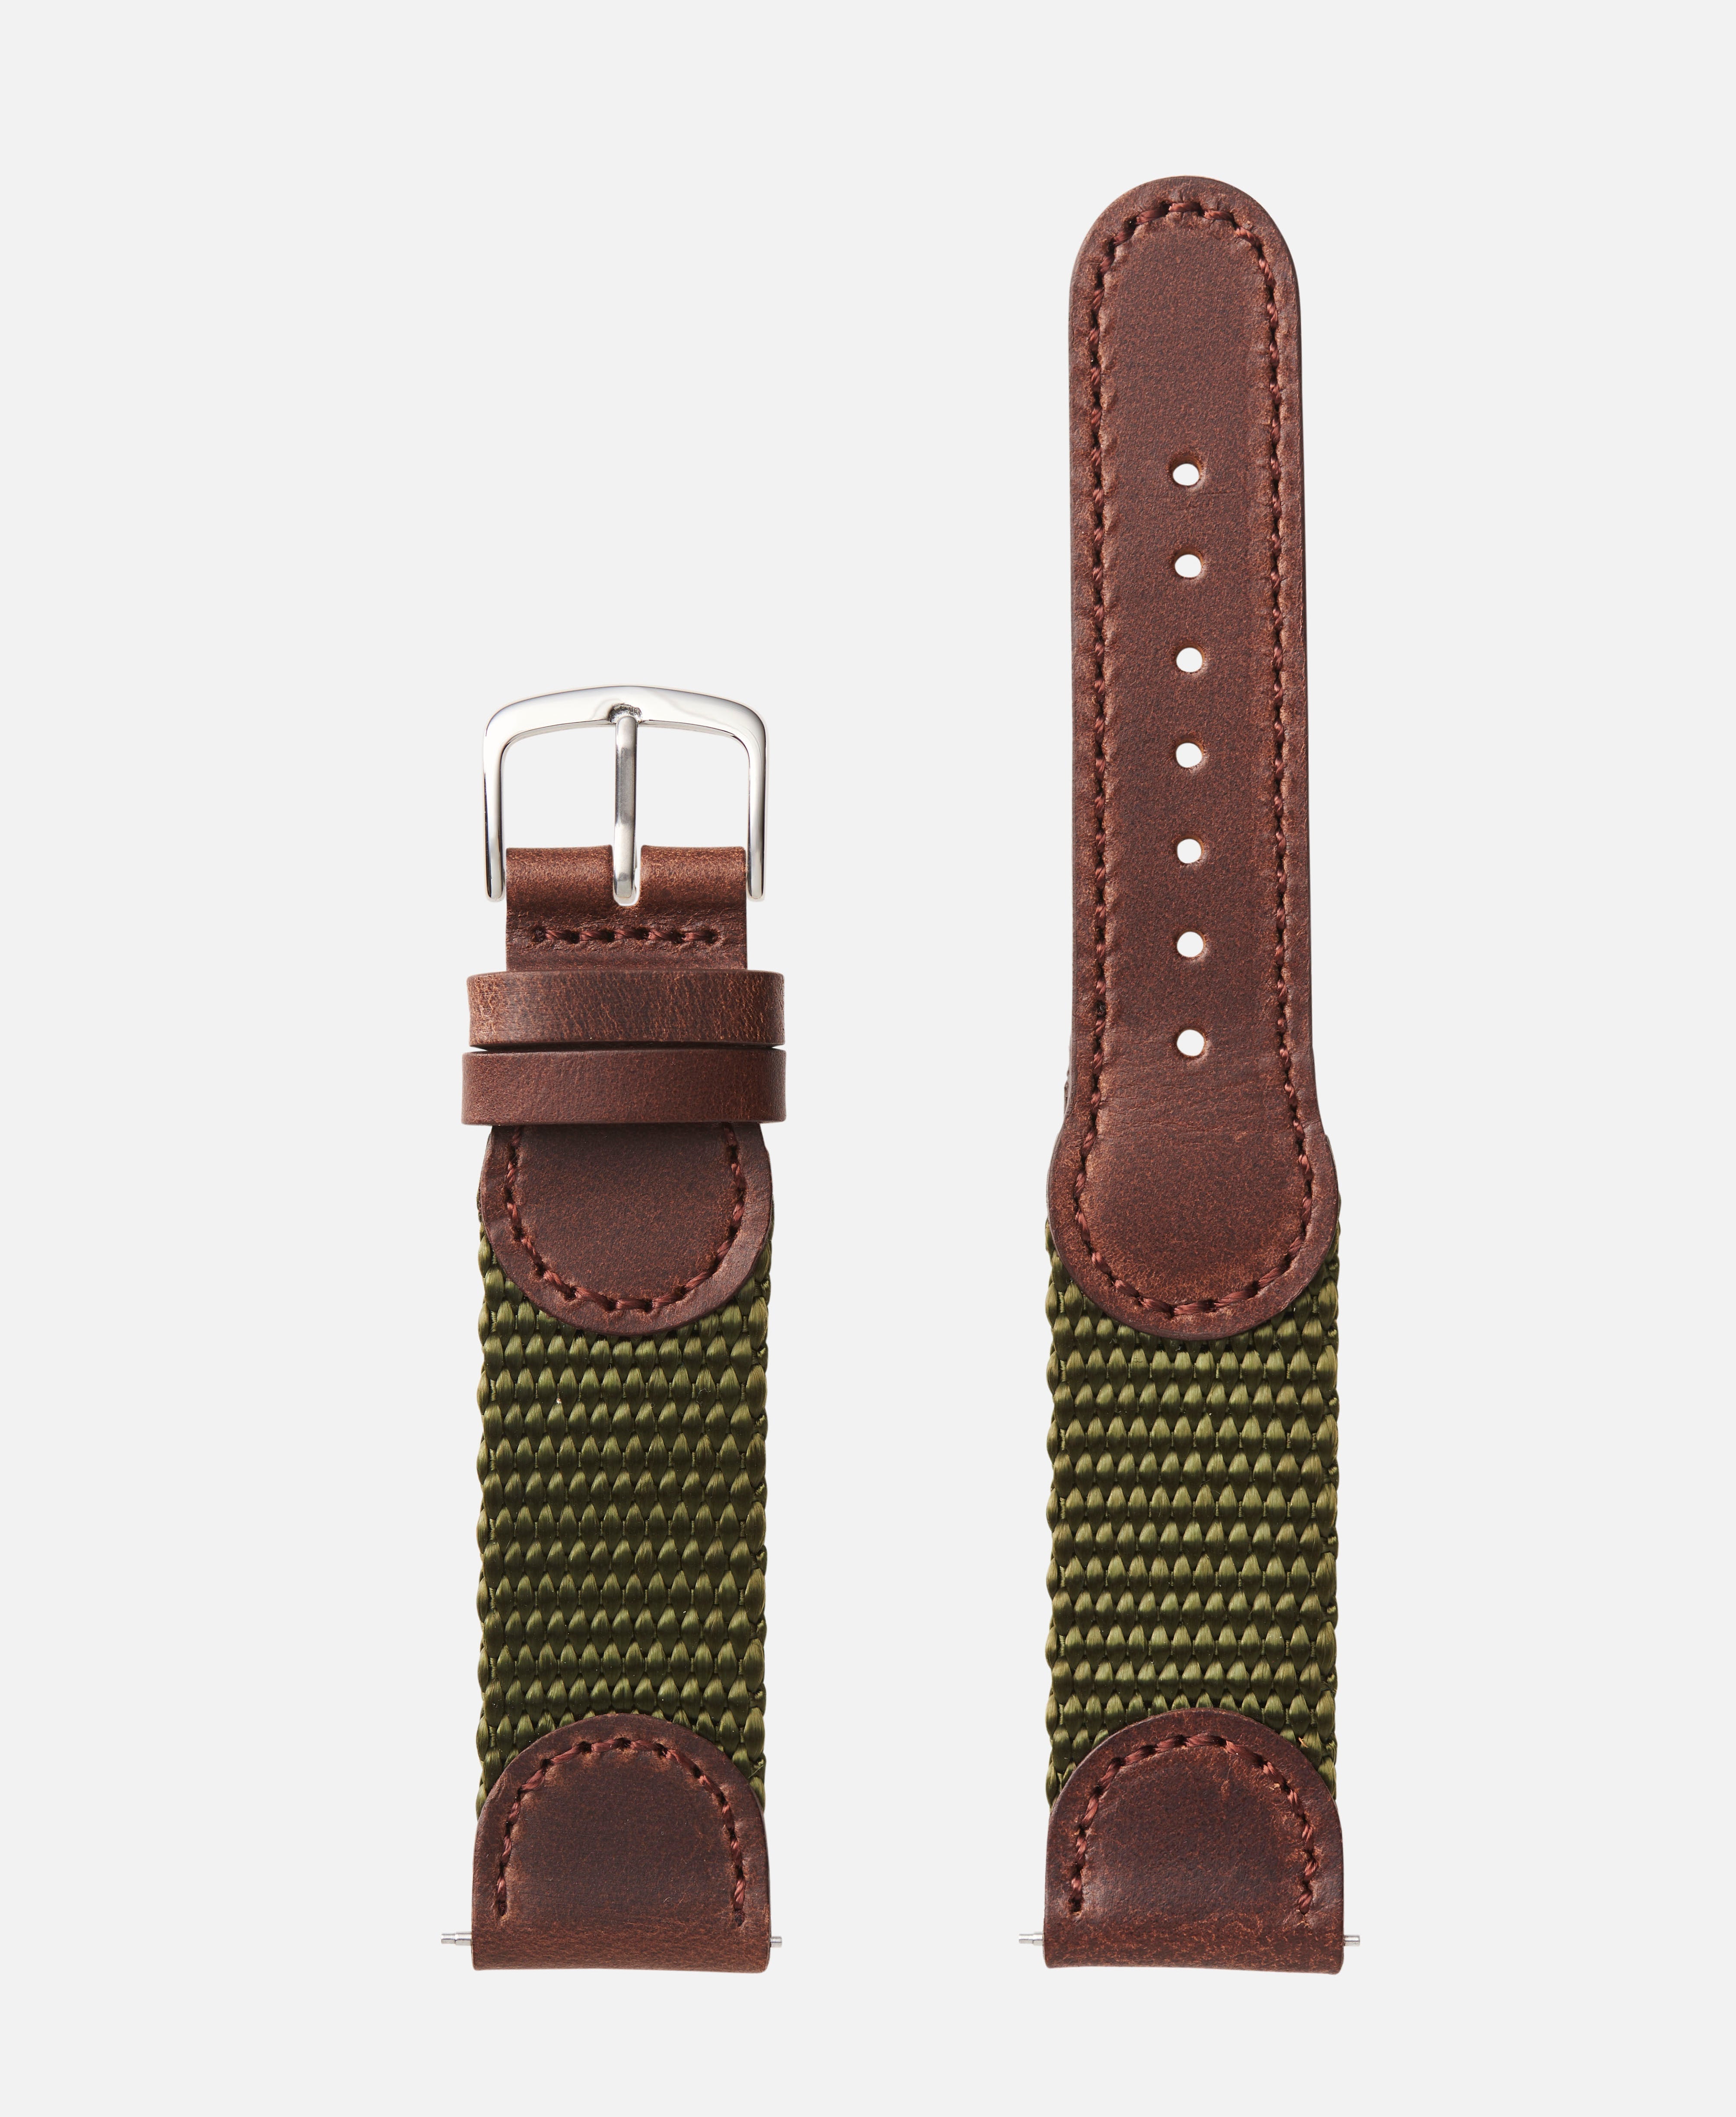 Swiss Army Style Leather | Traditional